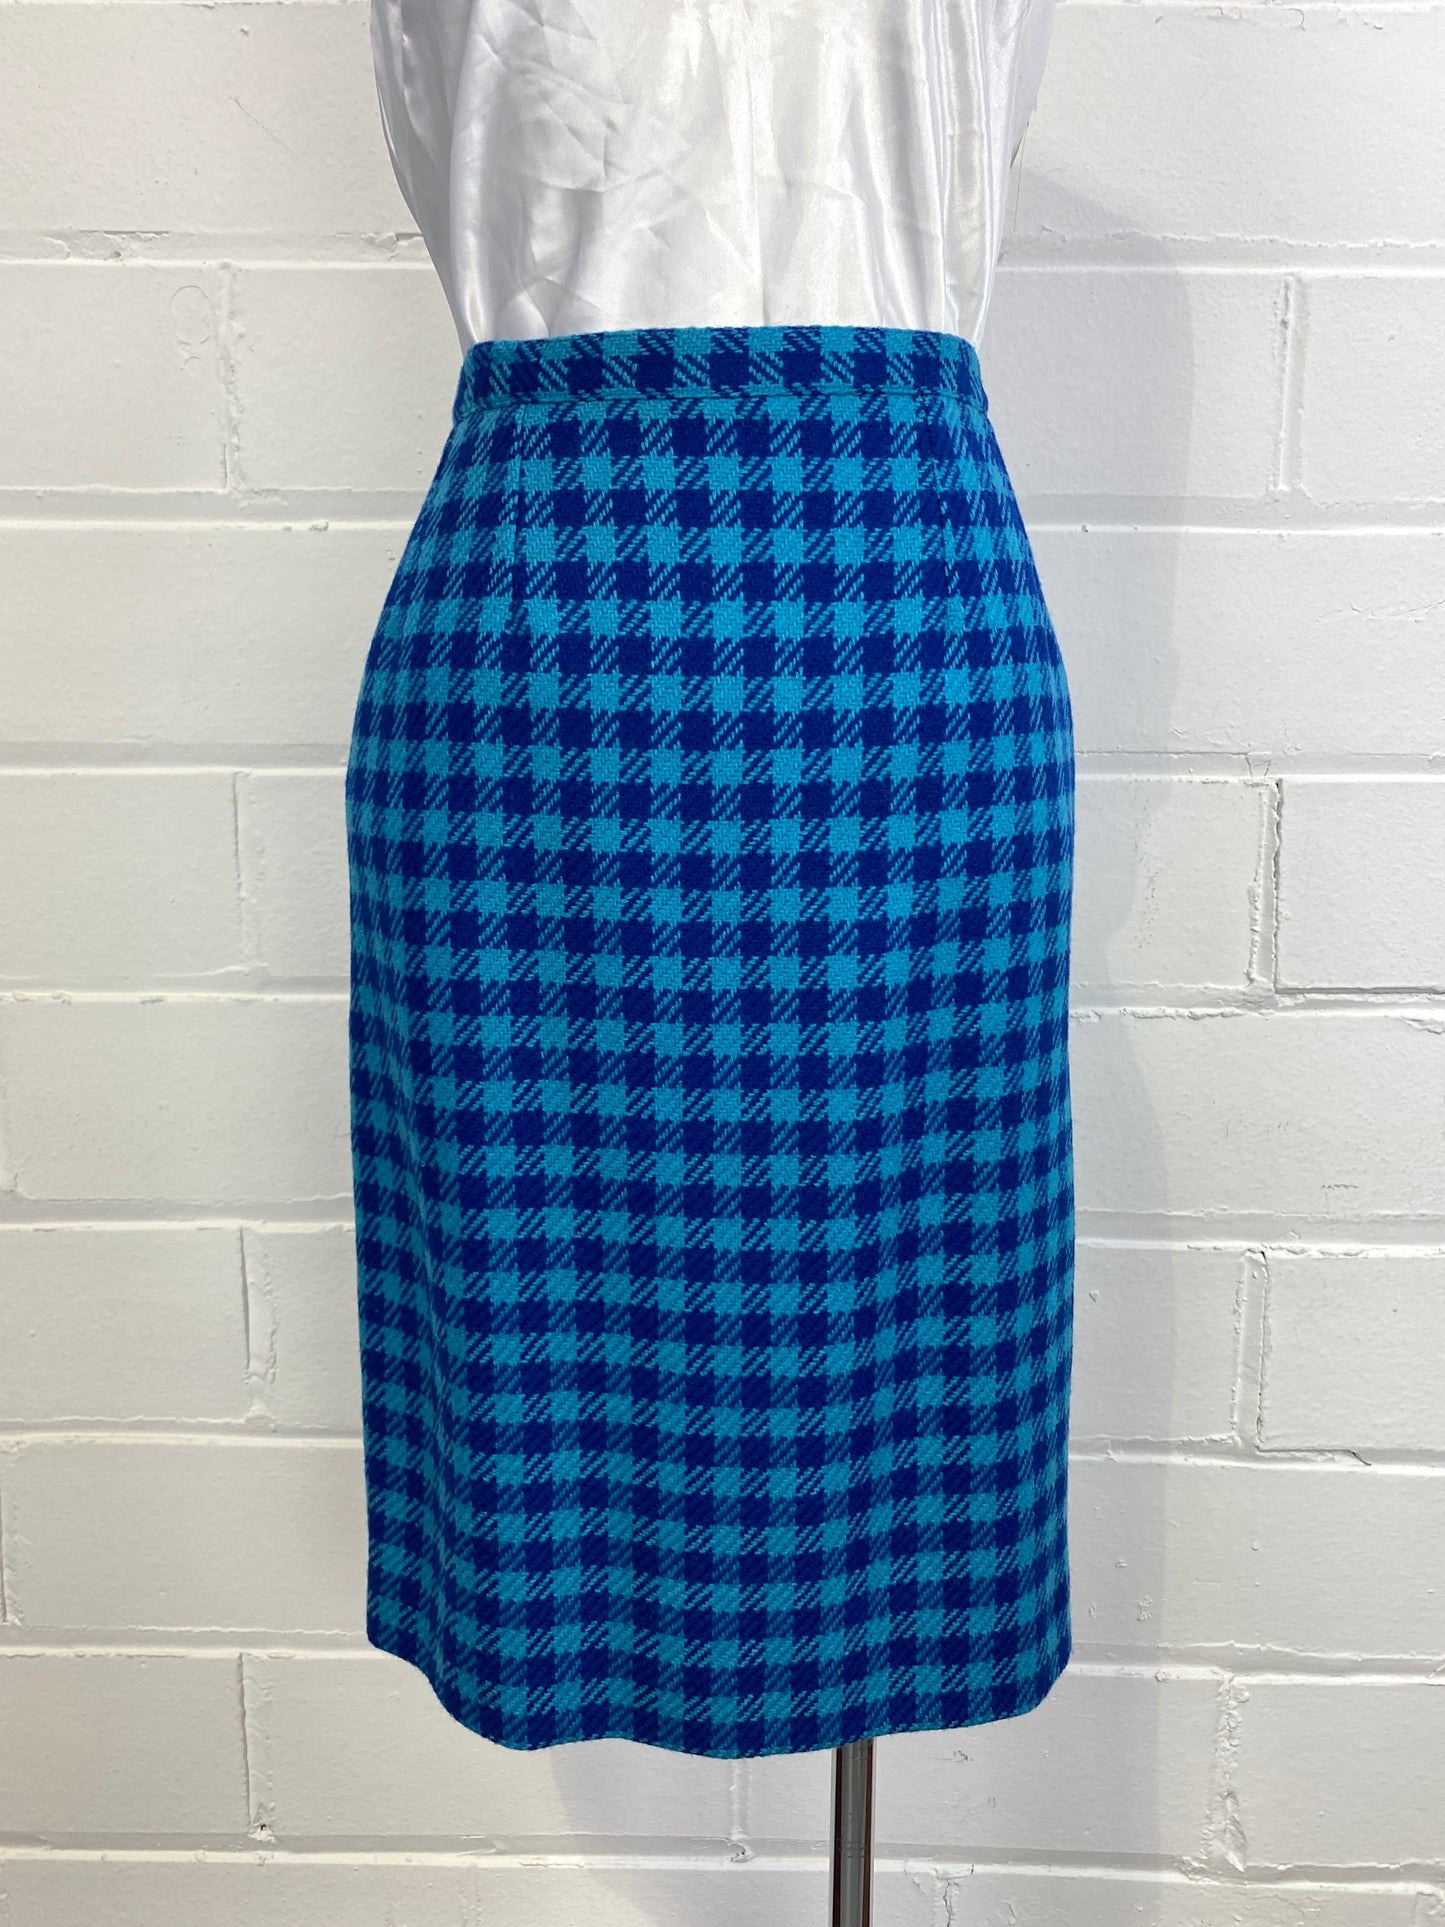 Vintage 90s Guy Laroche Blue Wool Check Skirt Suit, Small